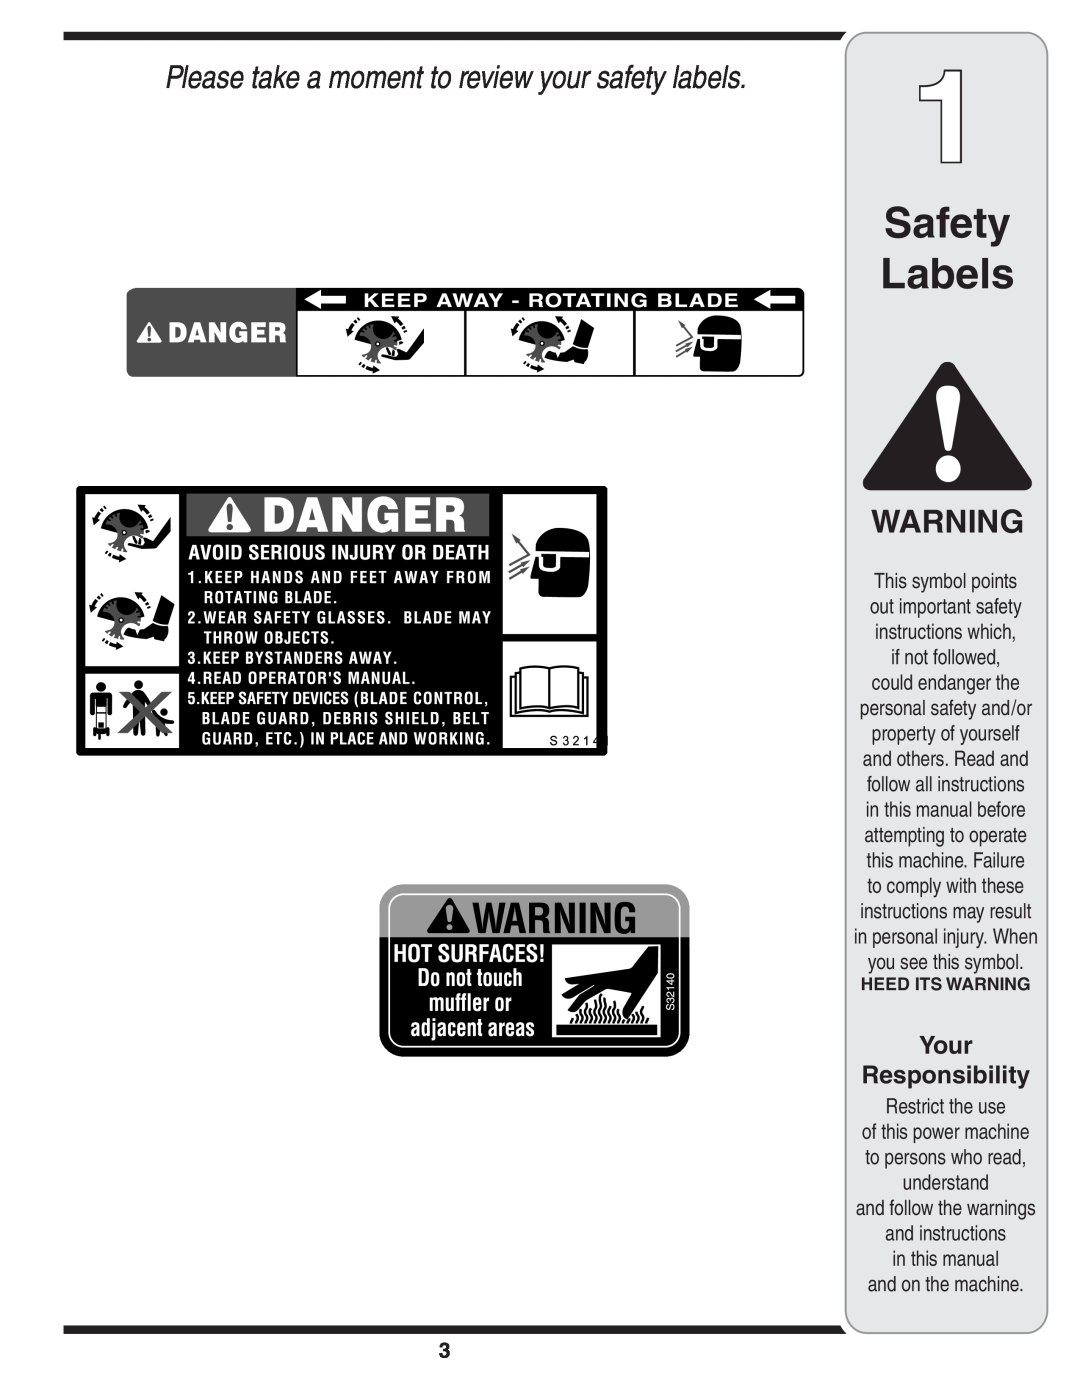 Troy-Bilt 554 Safety Labels, Your Responsibility, Please take a moment to review your safety labels, Heed Its Warning 